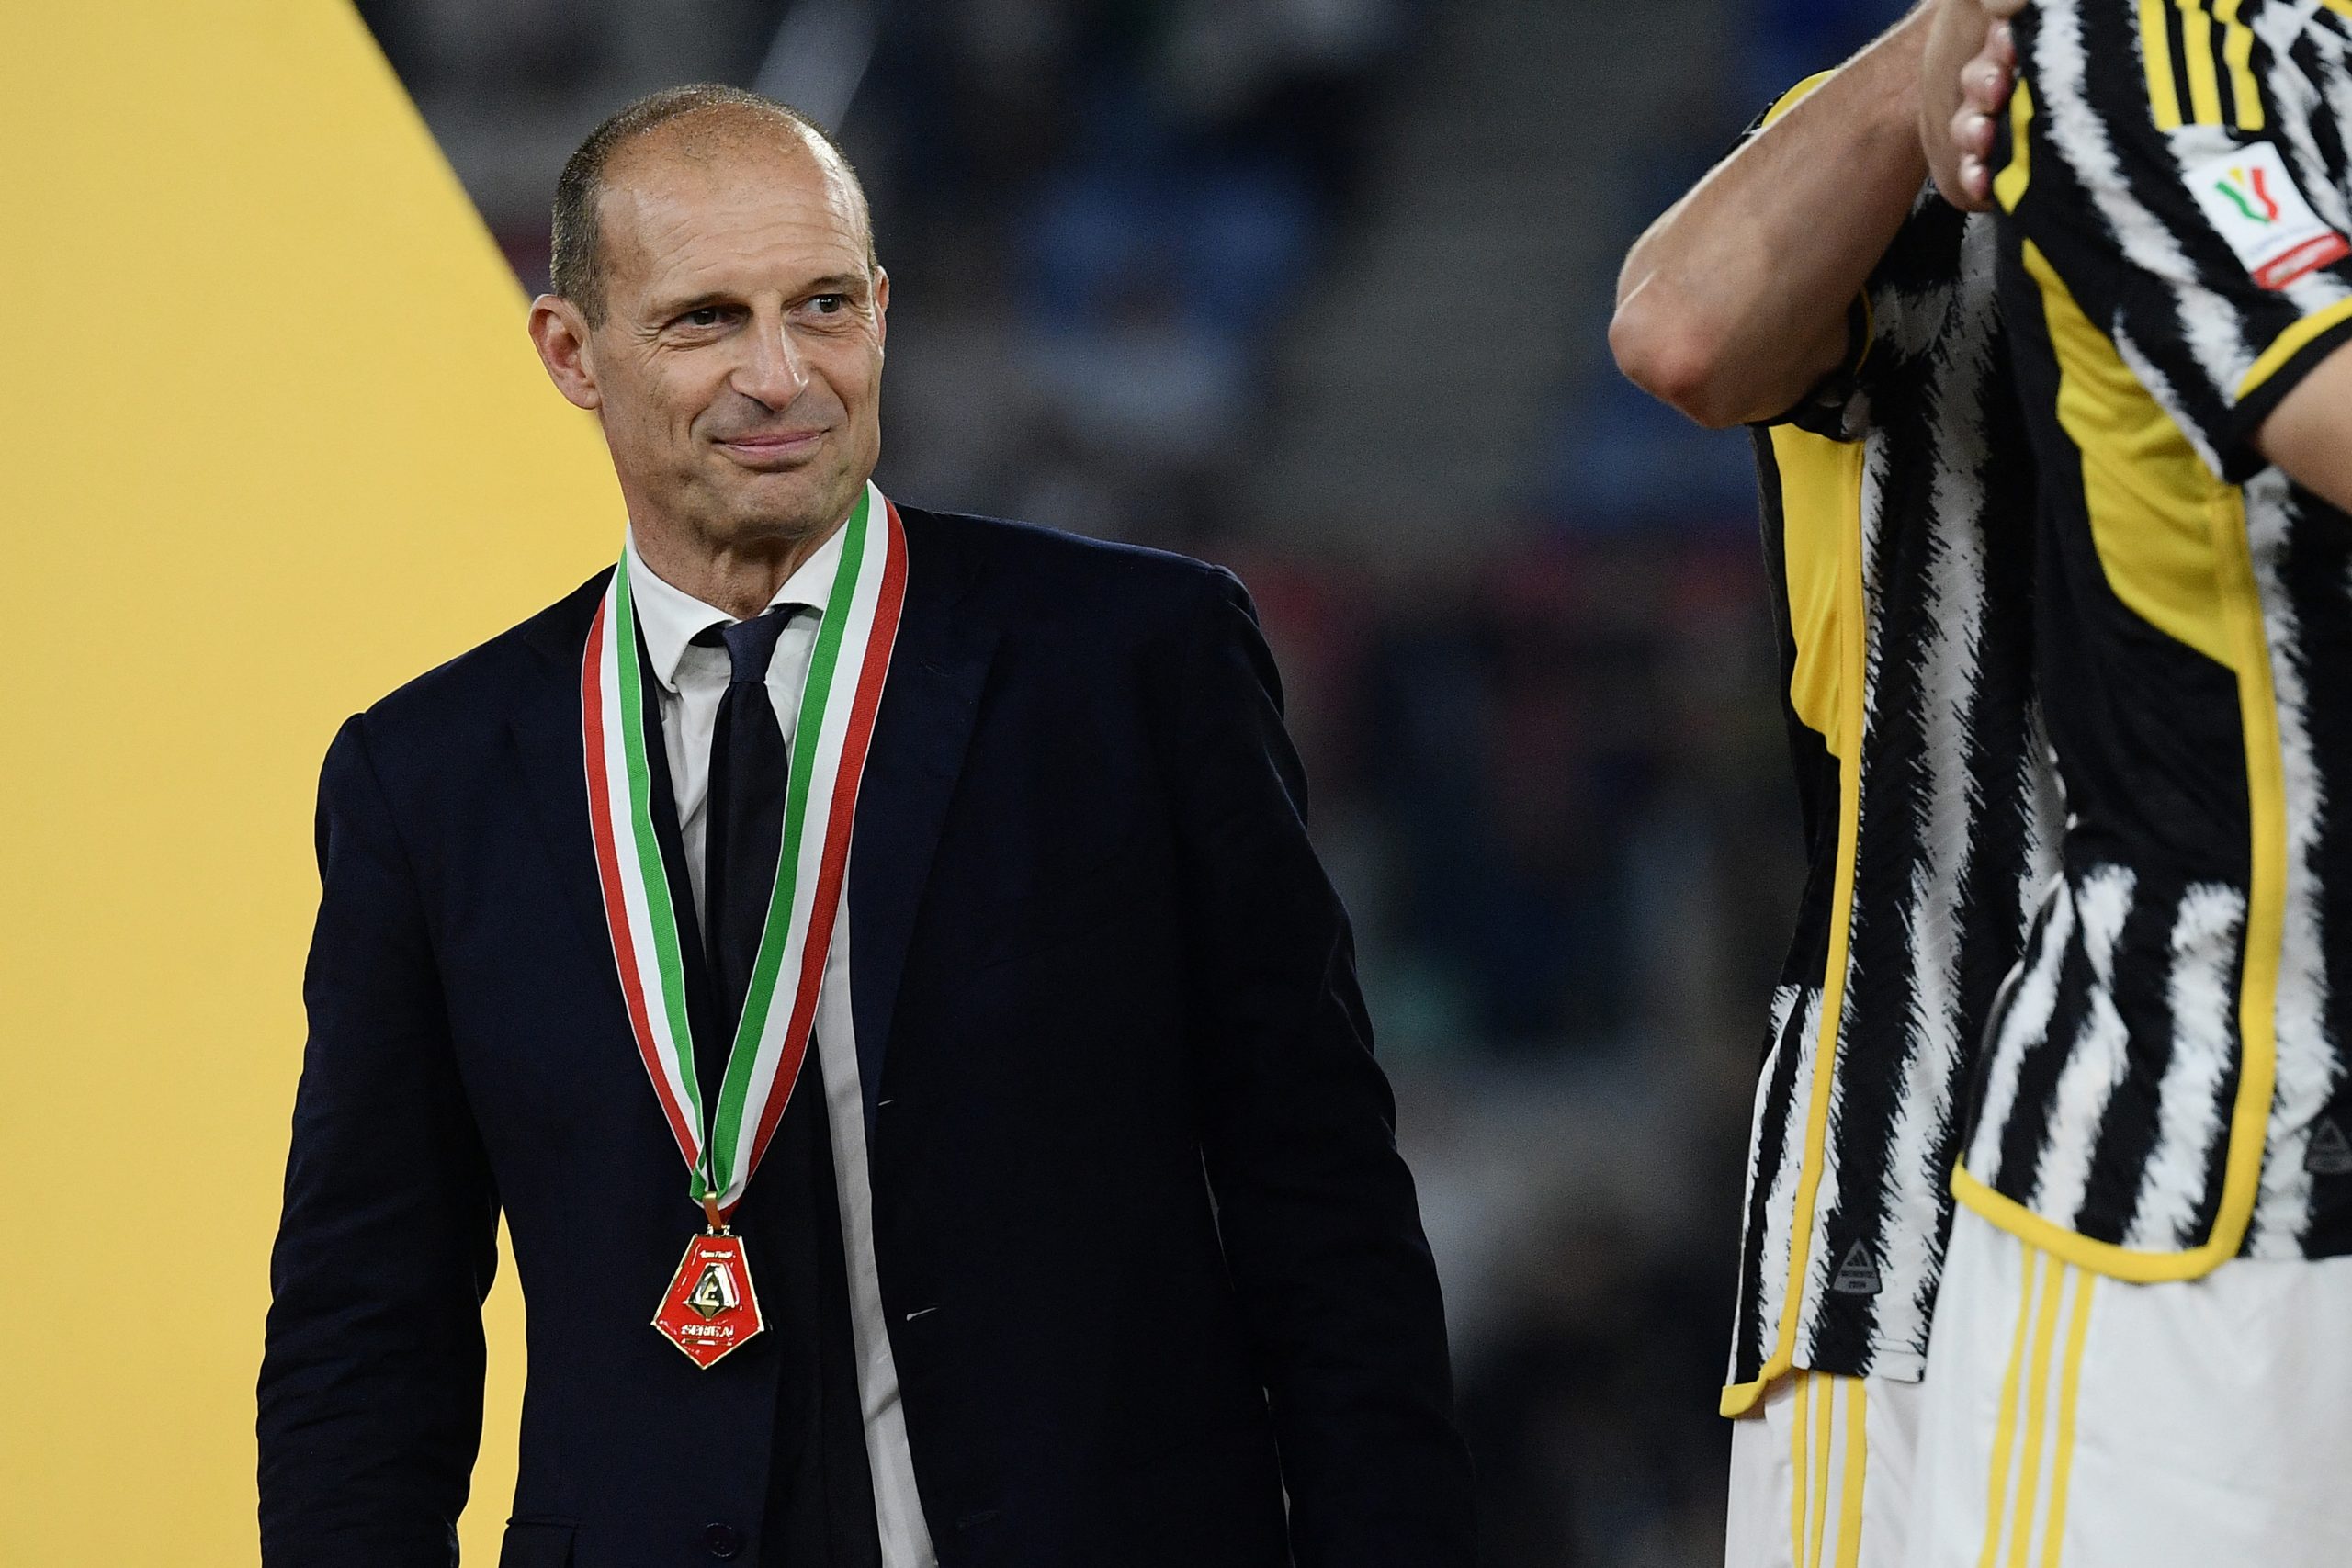 Watch: Juve's Allegri suspended two matches after cup final red - SportsDesk